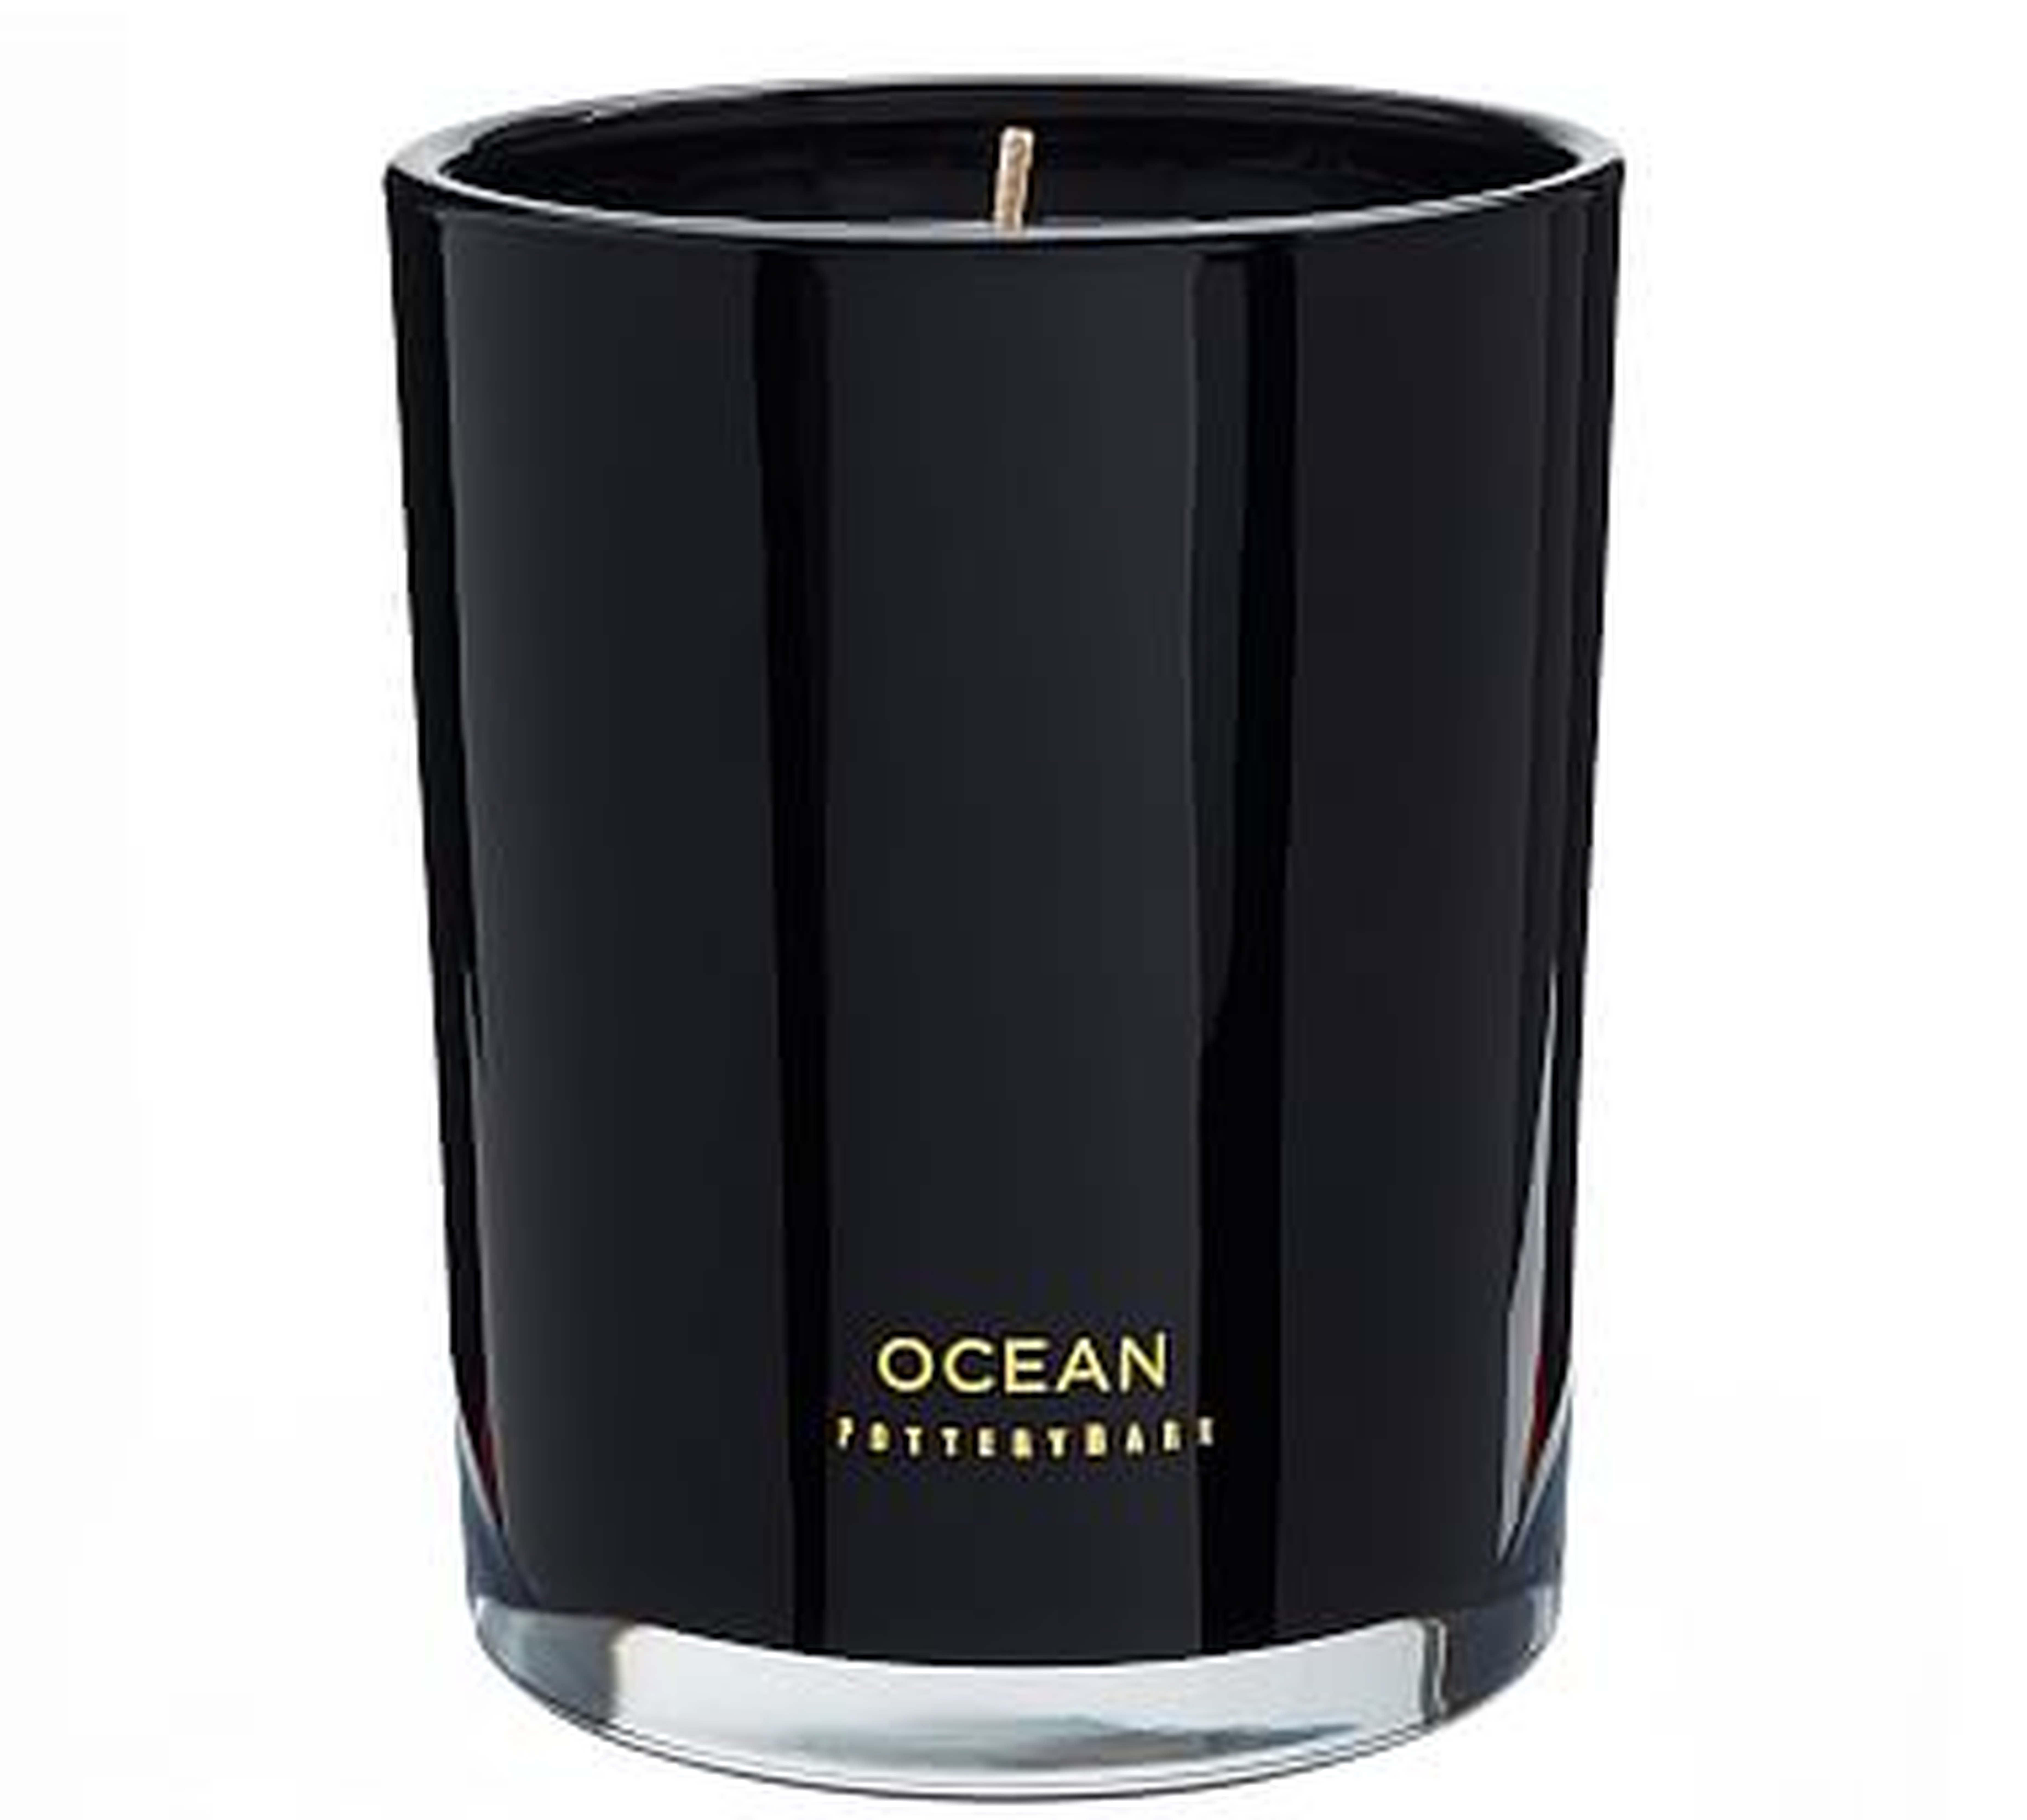 Signature Home Scent Candle Pot, Ocean - Large - Pottery Barn